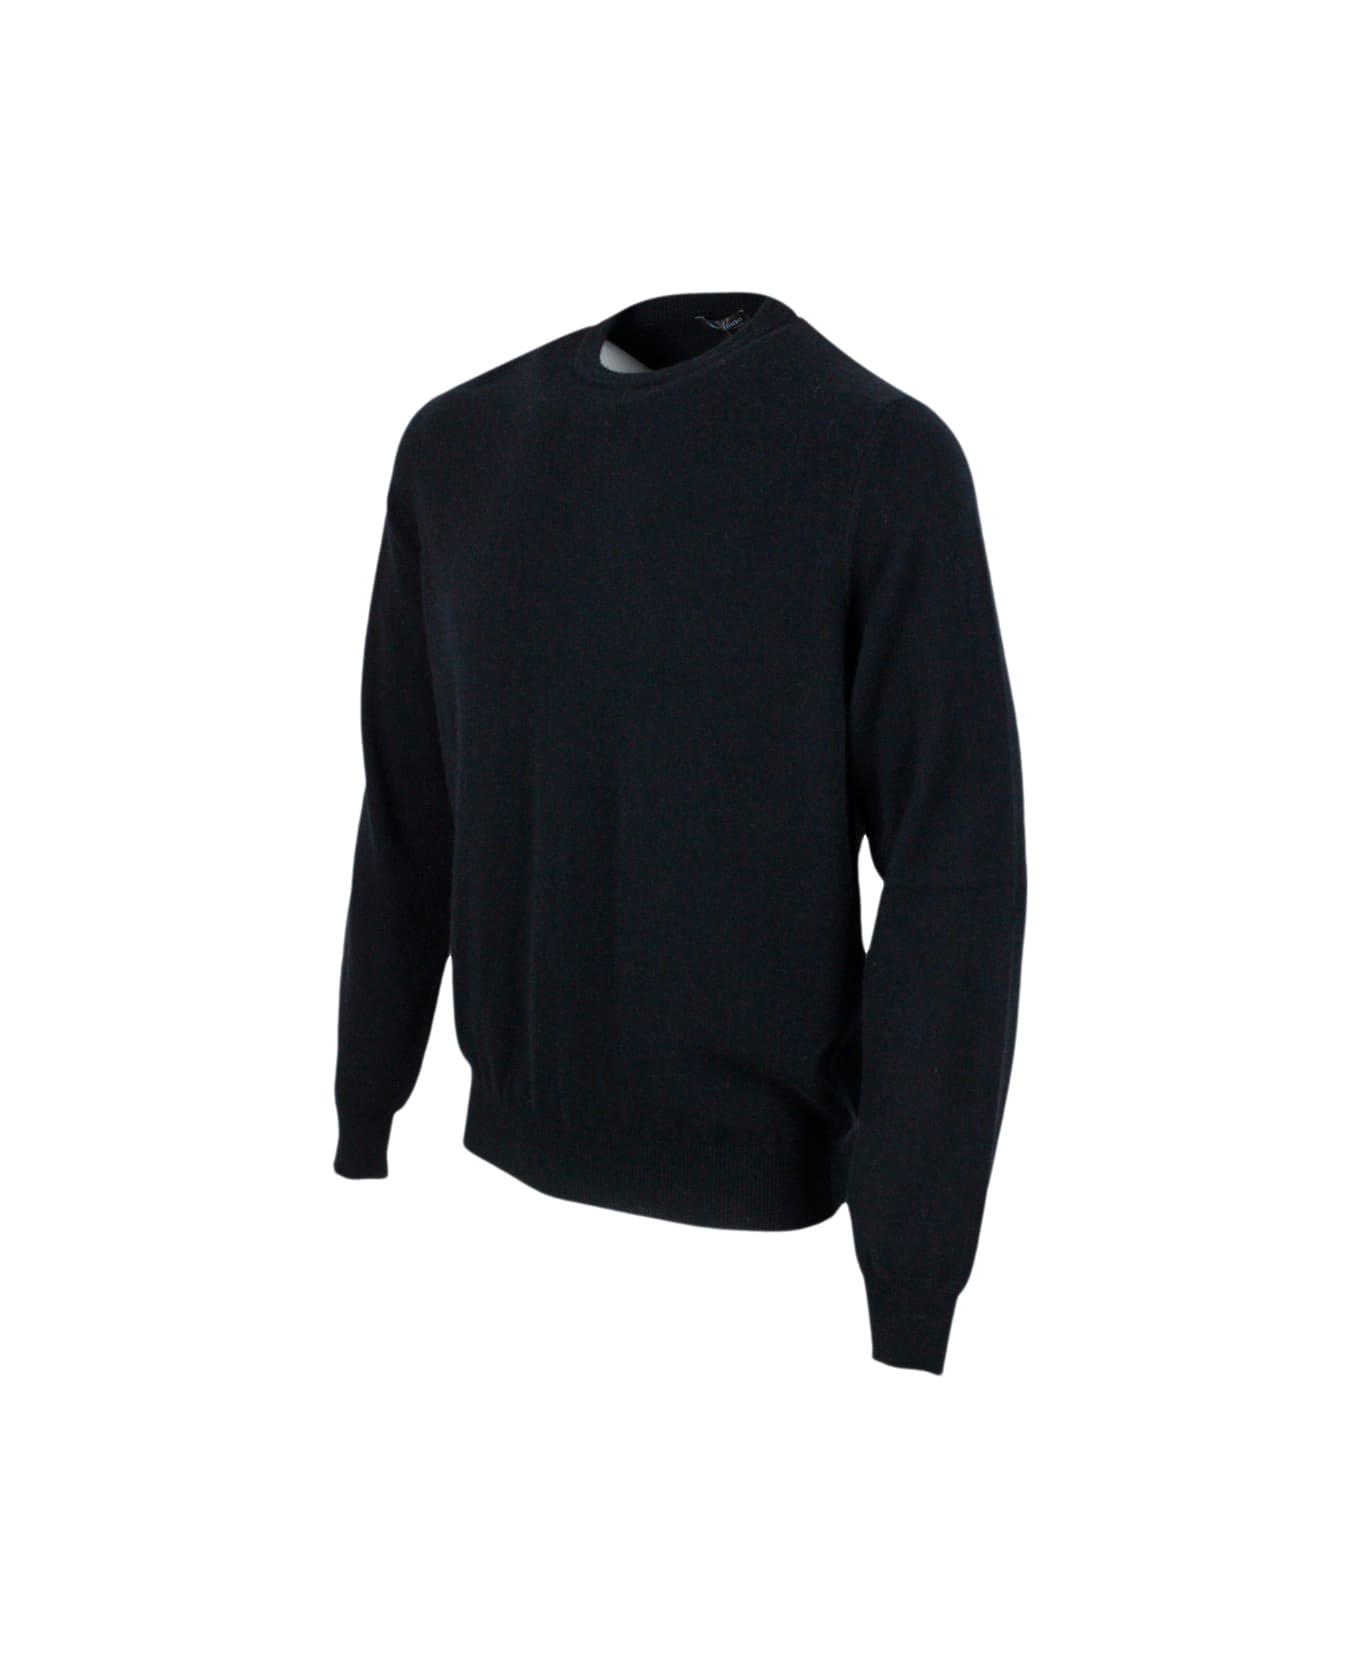 Colombo Long-sleeved Crewneck Sweater In Fine 2-ply 100% Kid Cashmere With Special Processing On The Edge Of The Neck - Black